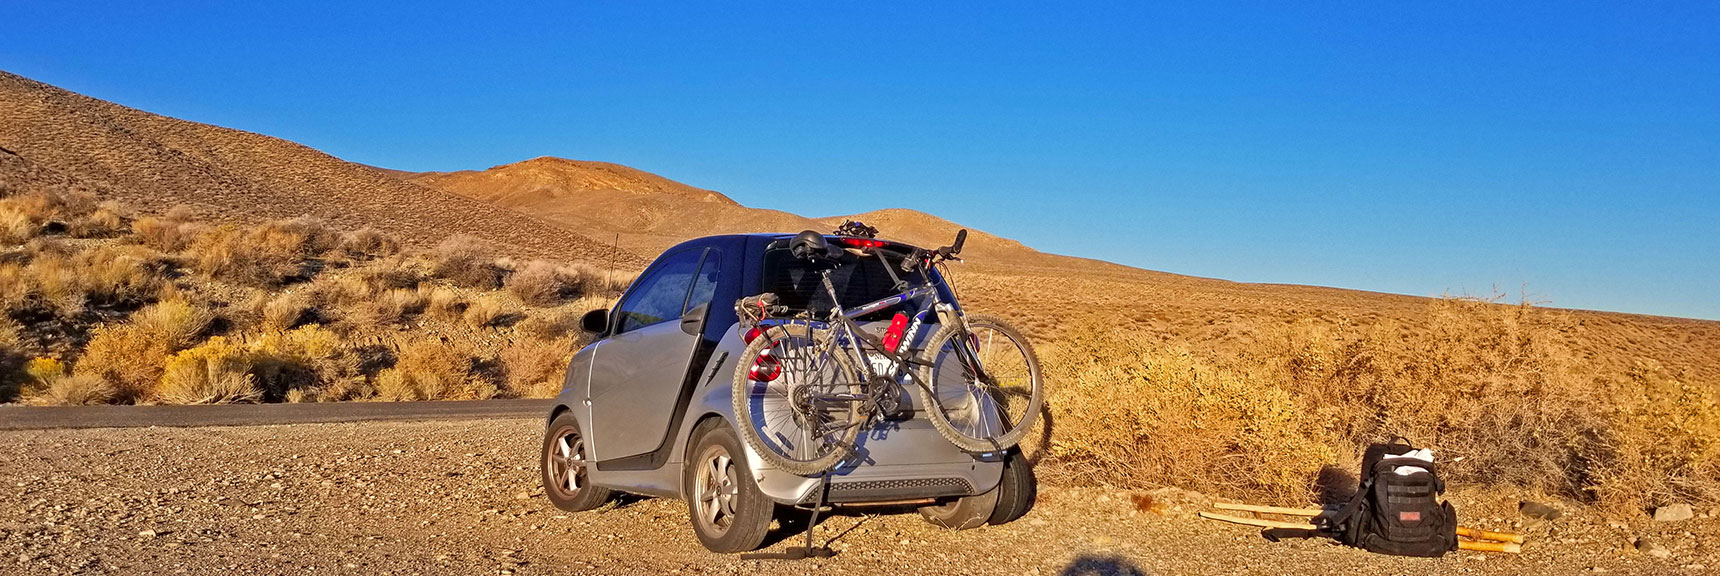 Leaving "The Beast" to Mountain Bike 9 Miles Up Unpaved Road to Skidoo | Skidoo Stamp Mill, Panamint Mountains, Death Valley National Park, CA